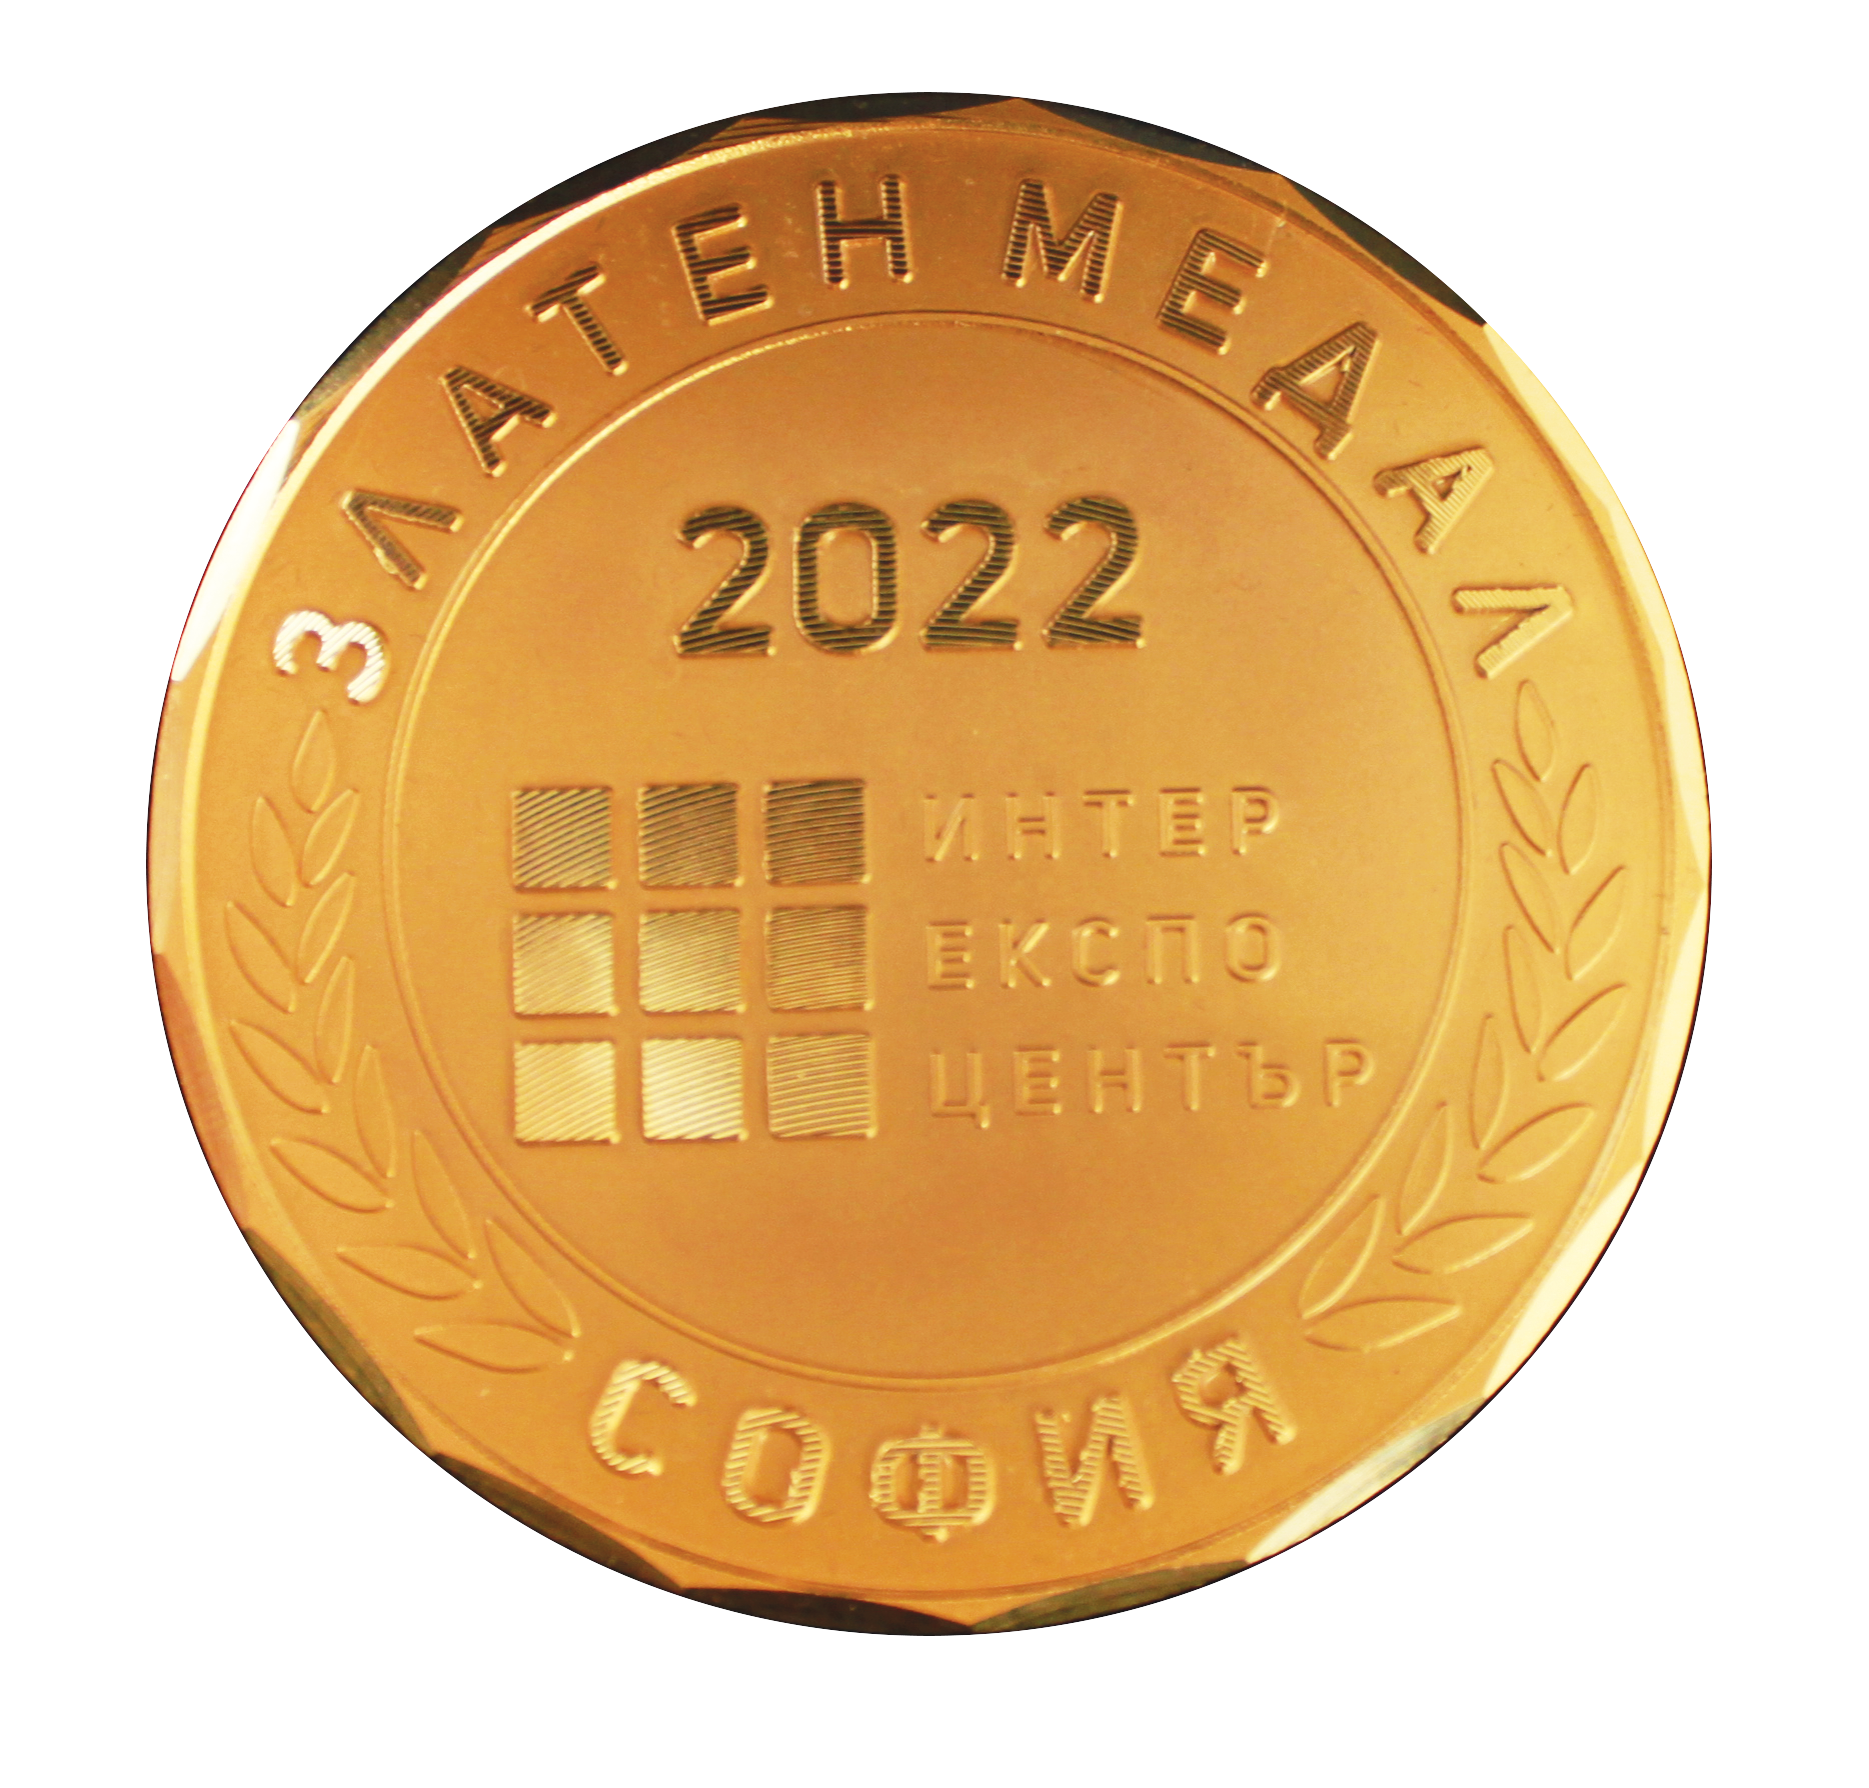 "Orehite" with a gold medal from "Mesomania 2022"